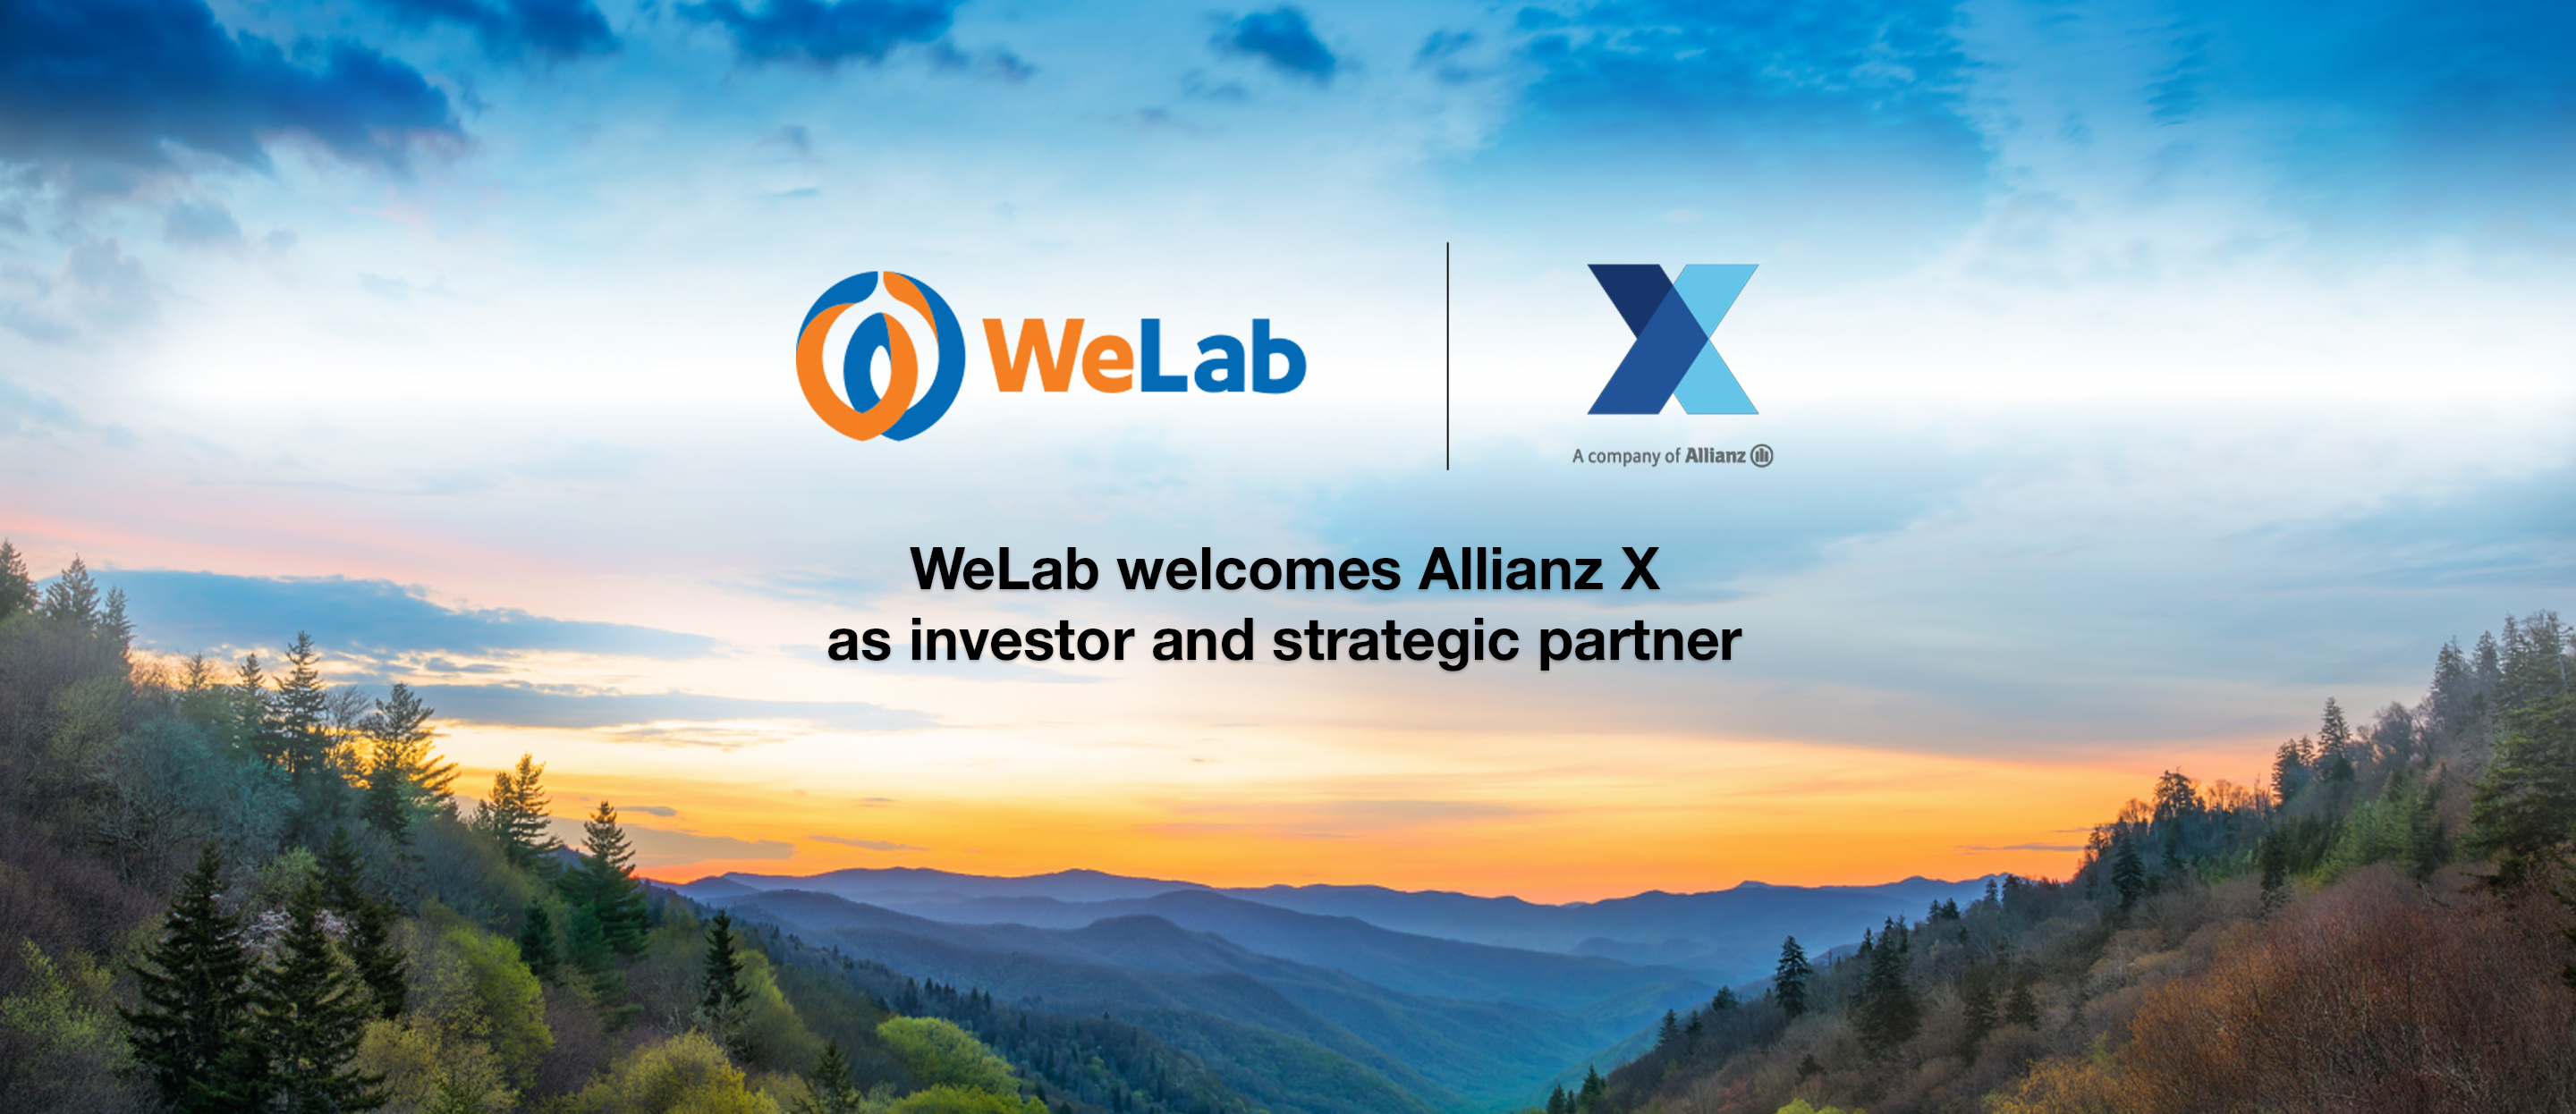 Announcing US$75m Series C-1 initial closing led by Allianz X